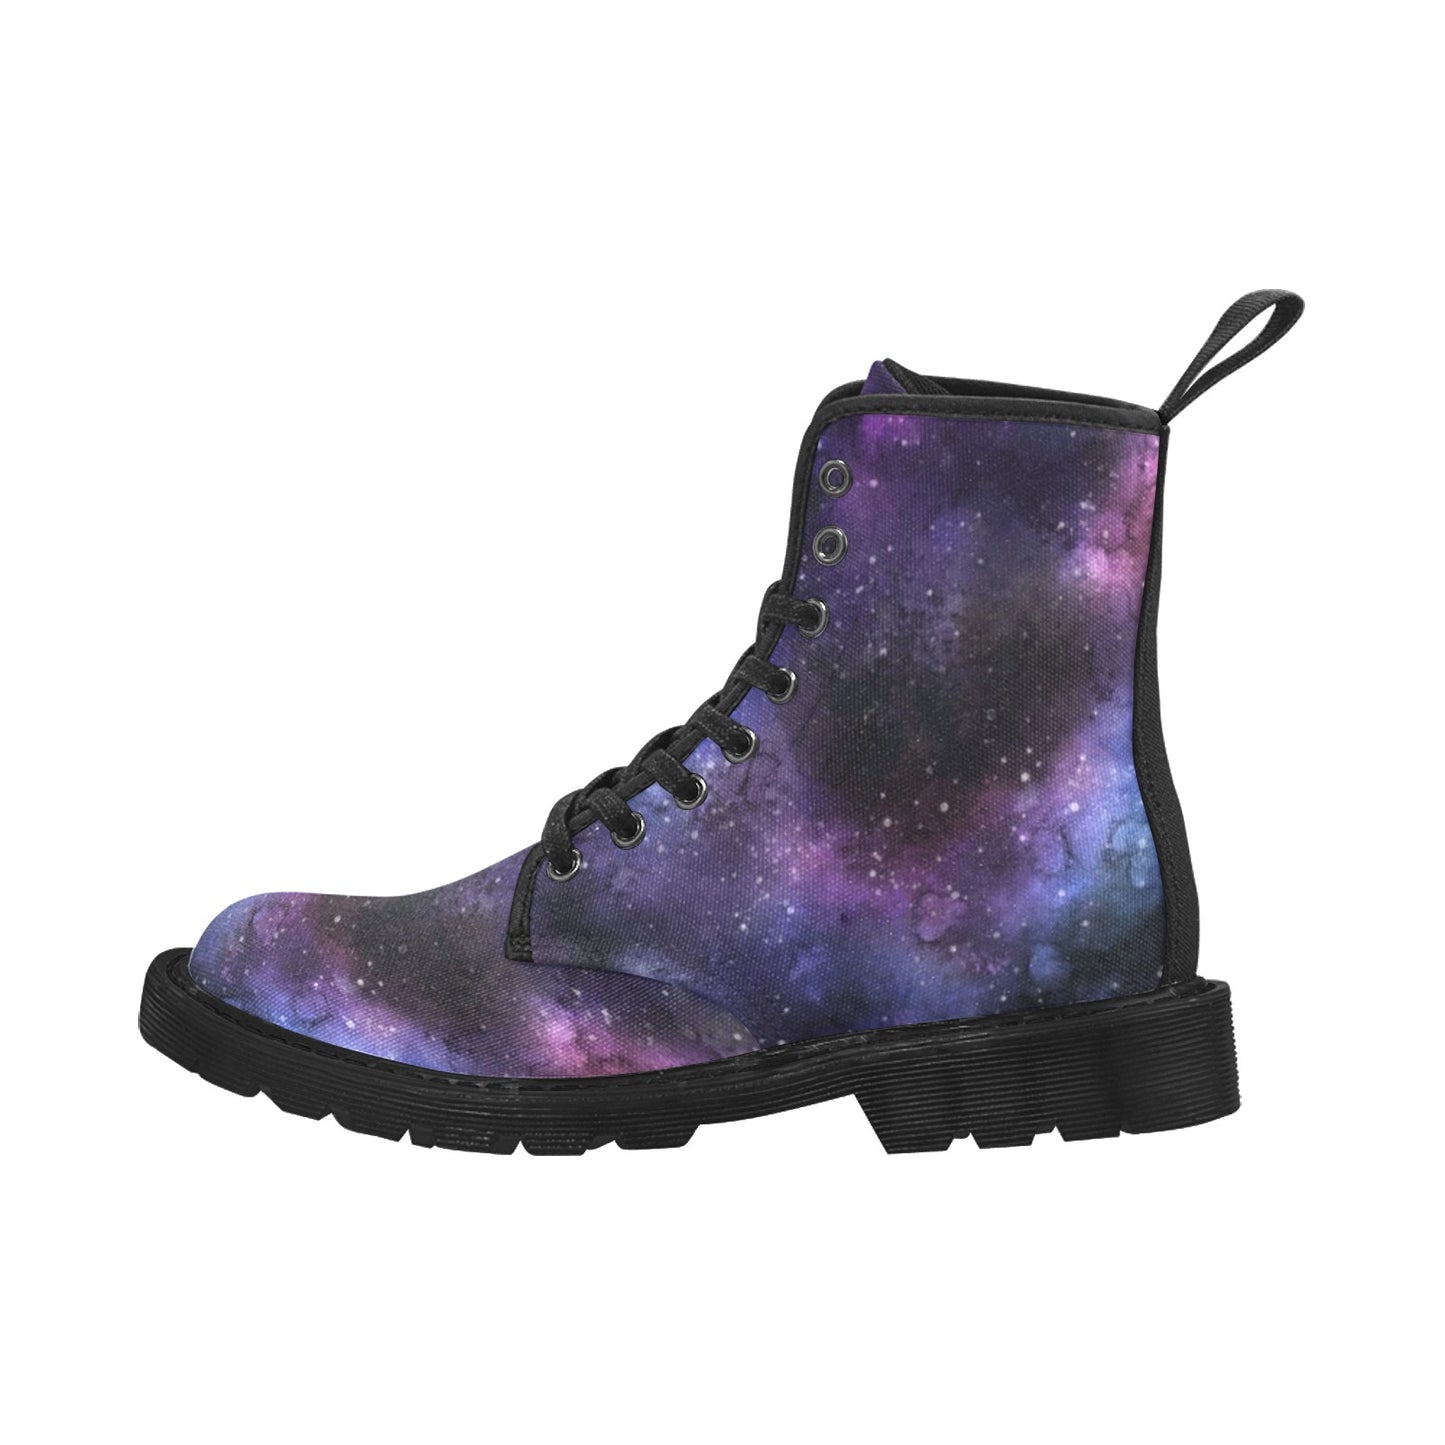 Galaxy Men Combat Boots, Cosmos Universe Space Stars Purple Designer Vegan Canvas Festival Party Lace Up Shoes Print Casual Lightweight Starcove Fashion